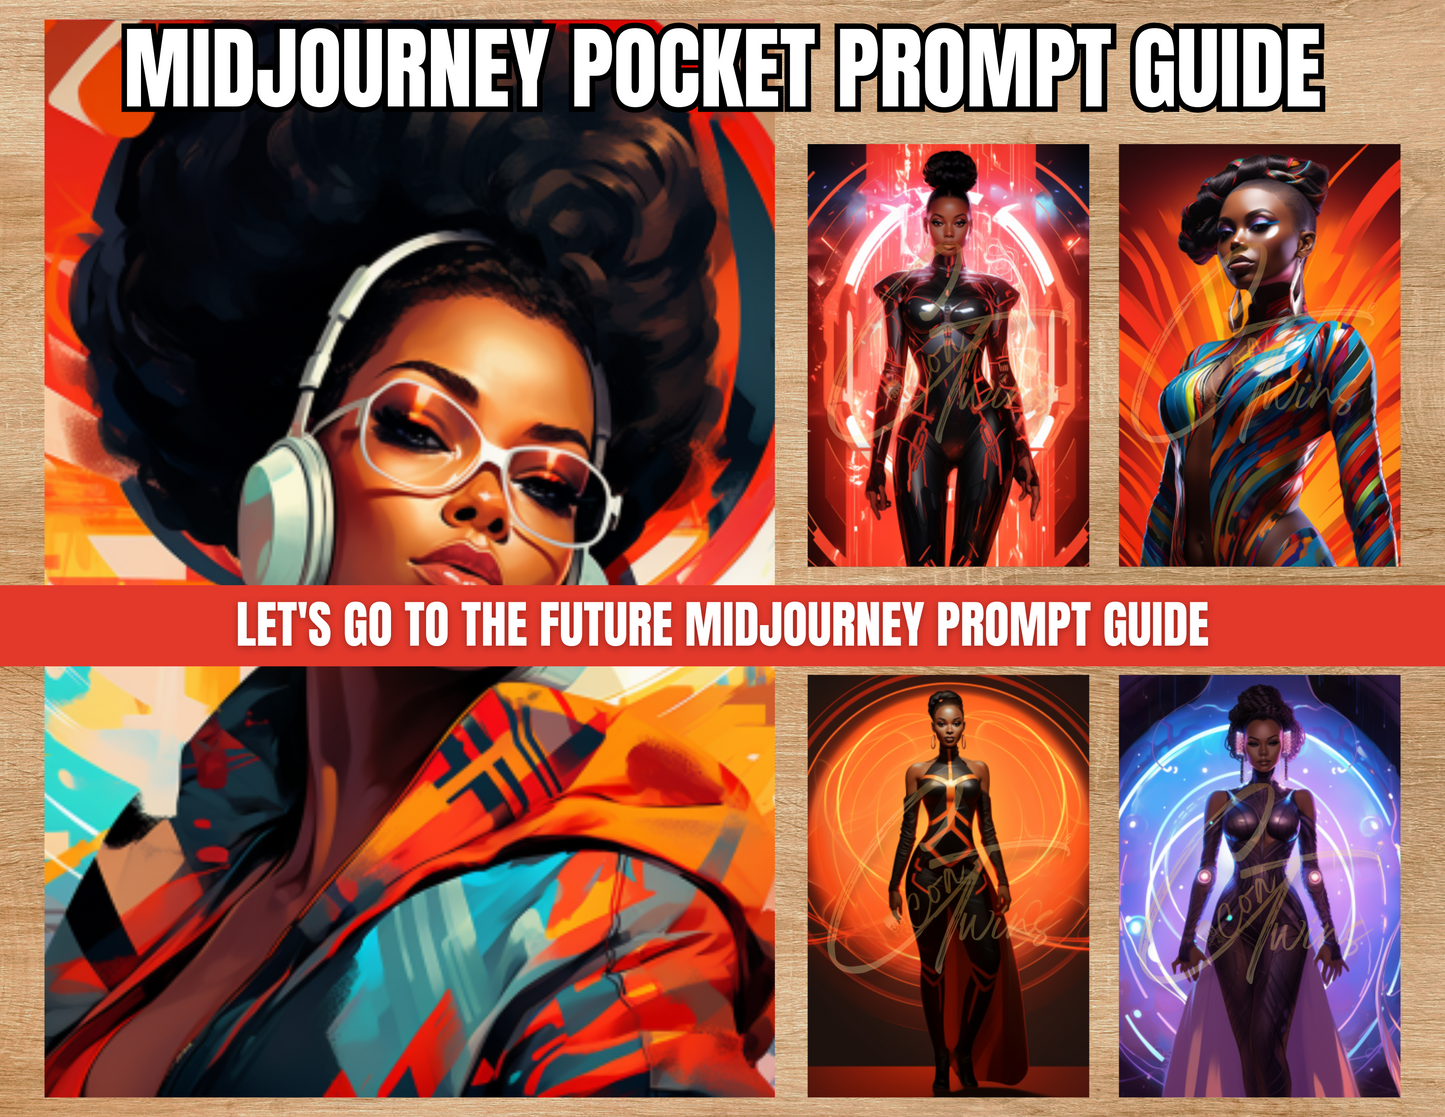 Let's Go to the Future-EB | PLR MidJourney Prompts Guides